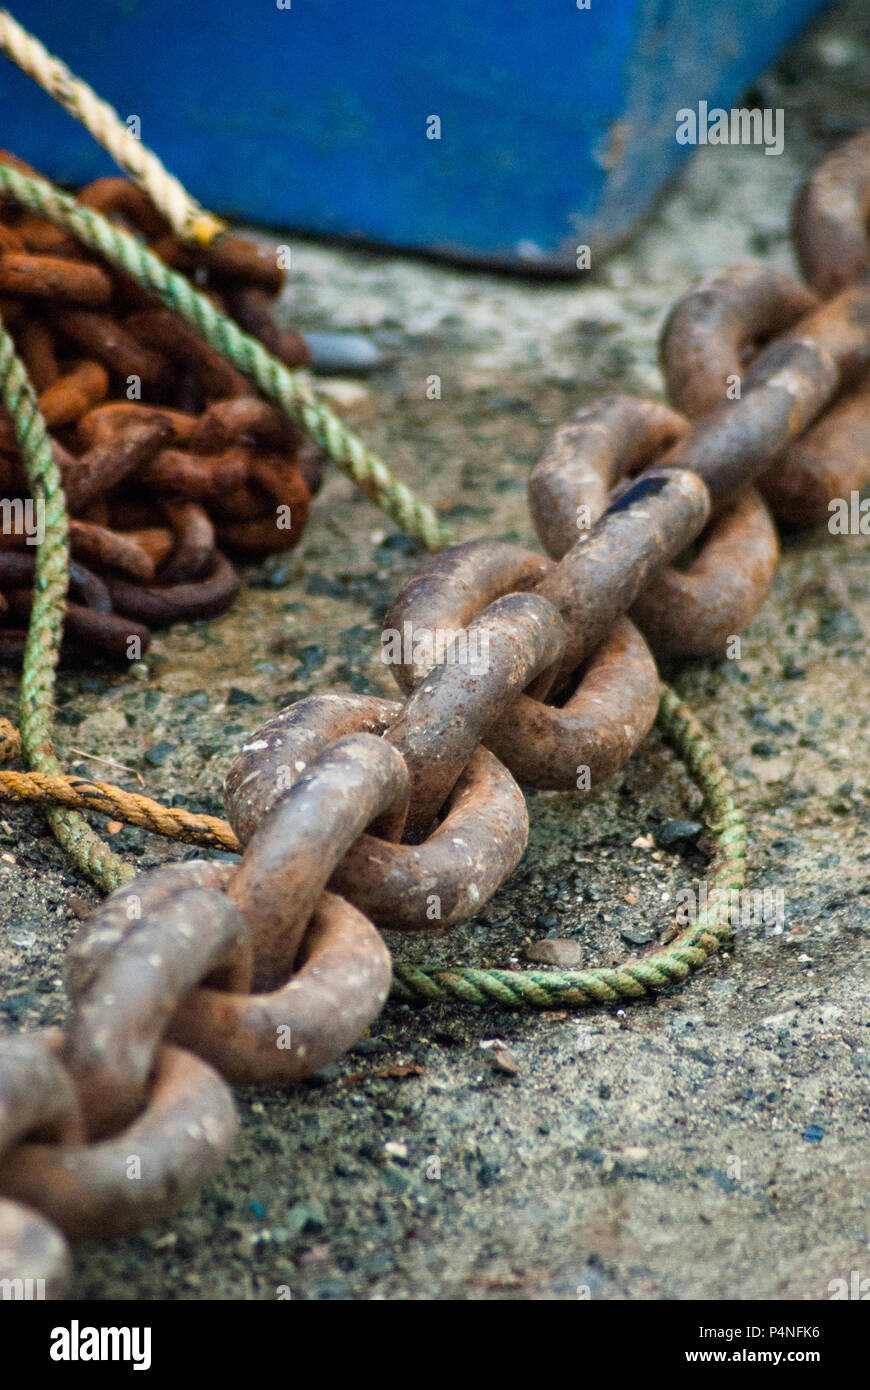 https://c8.alamy.com/comp/P4NFK6/an-anchor-chain-with-rope-on-the-floor-P4NFK6.jpg